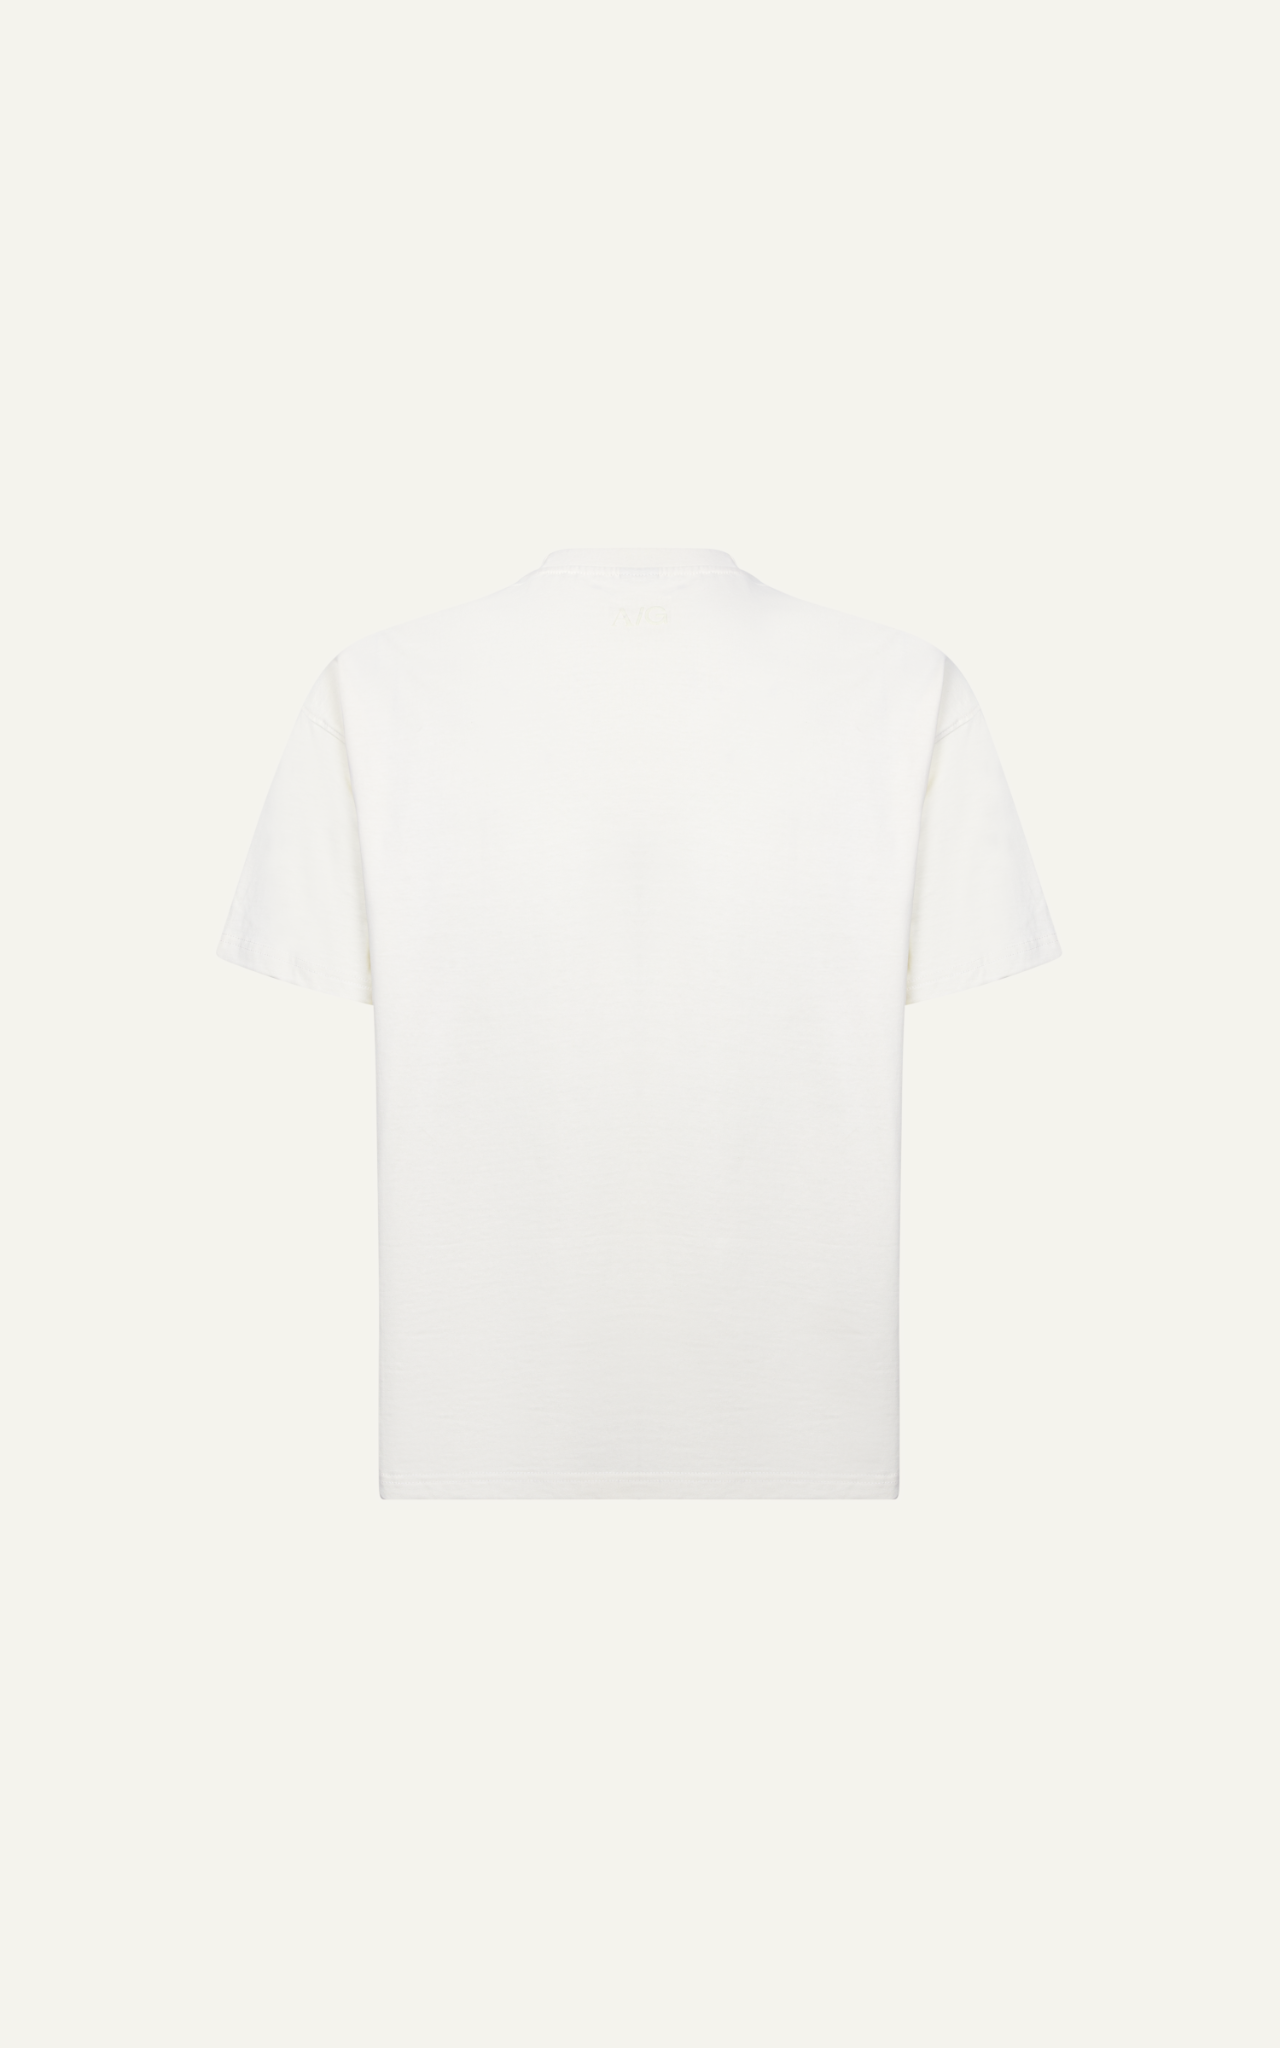 AG30 FACTORY LOOSE FIT NEW LOGO T-SHIRT - OFF WHITE